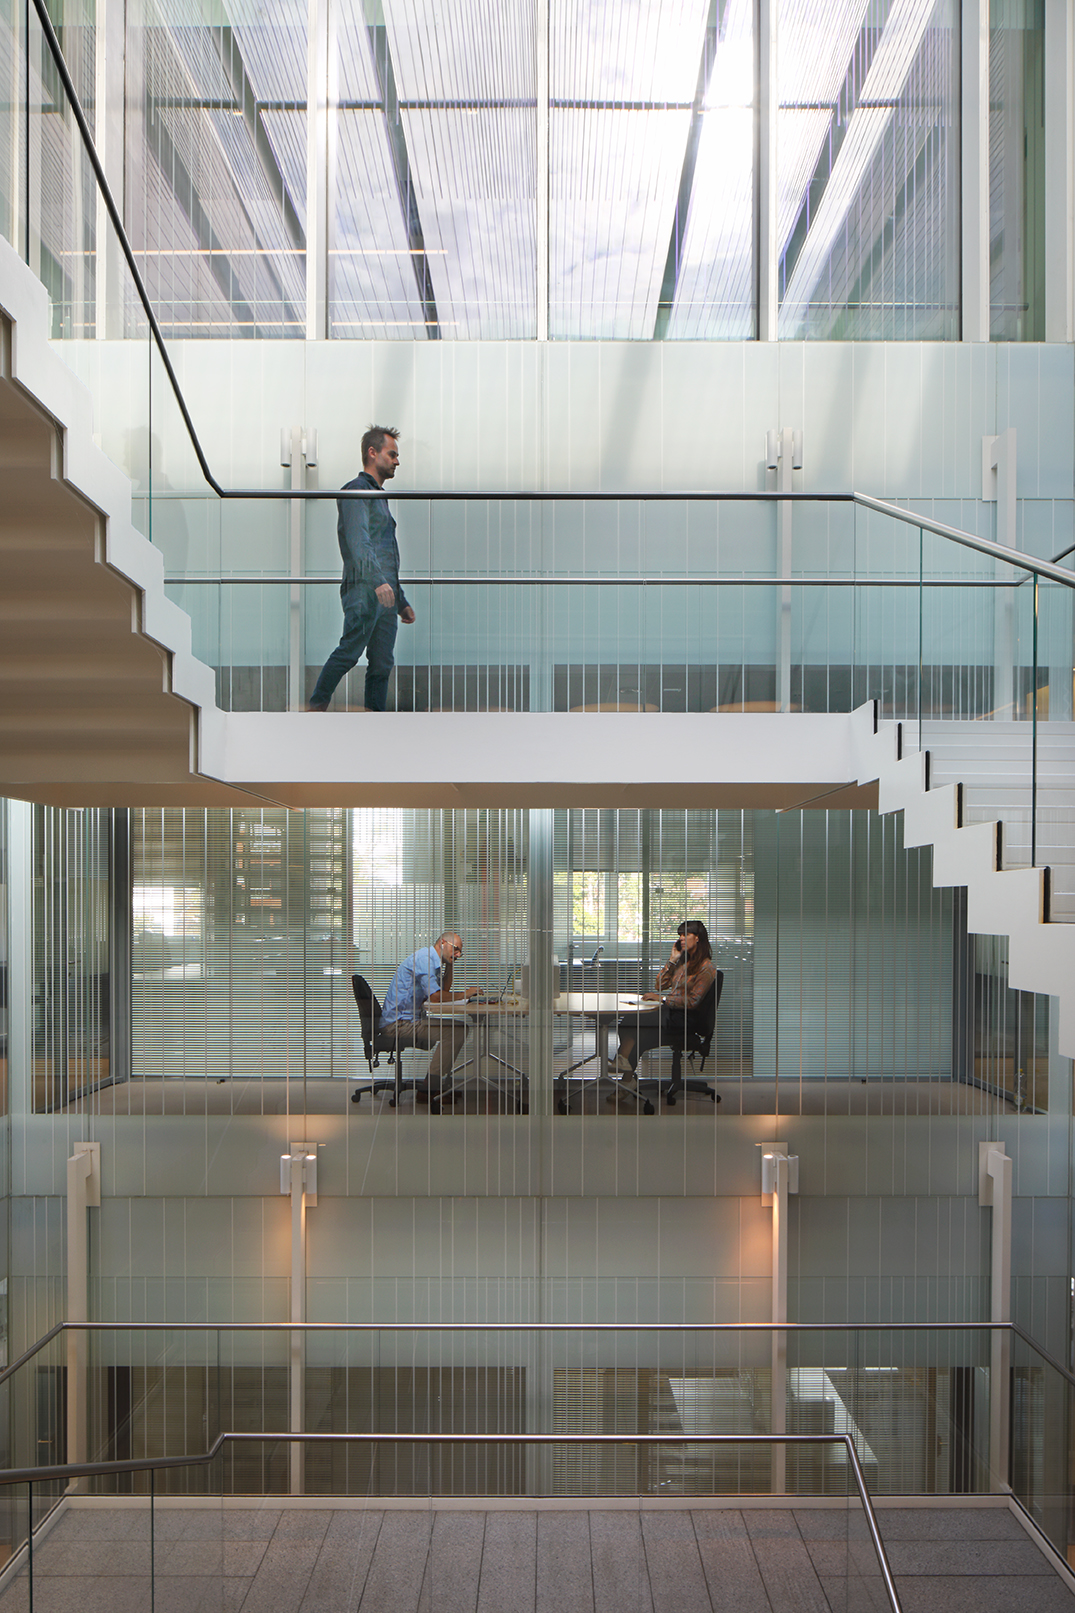 Kennedy Institute, Oxford. Interiors of rooftop extension by Fathom Architects.